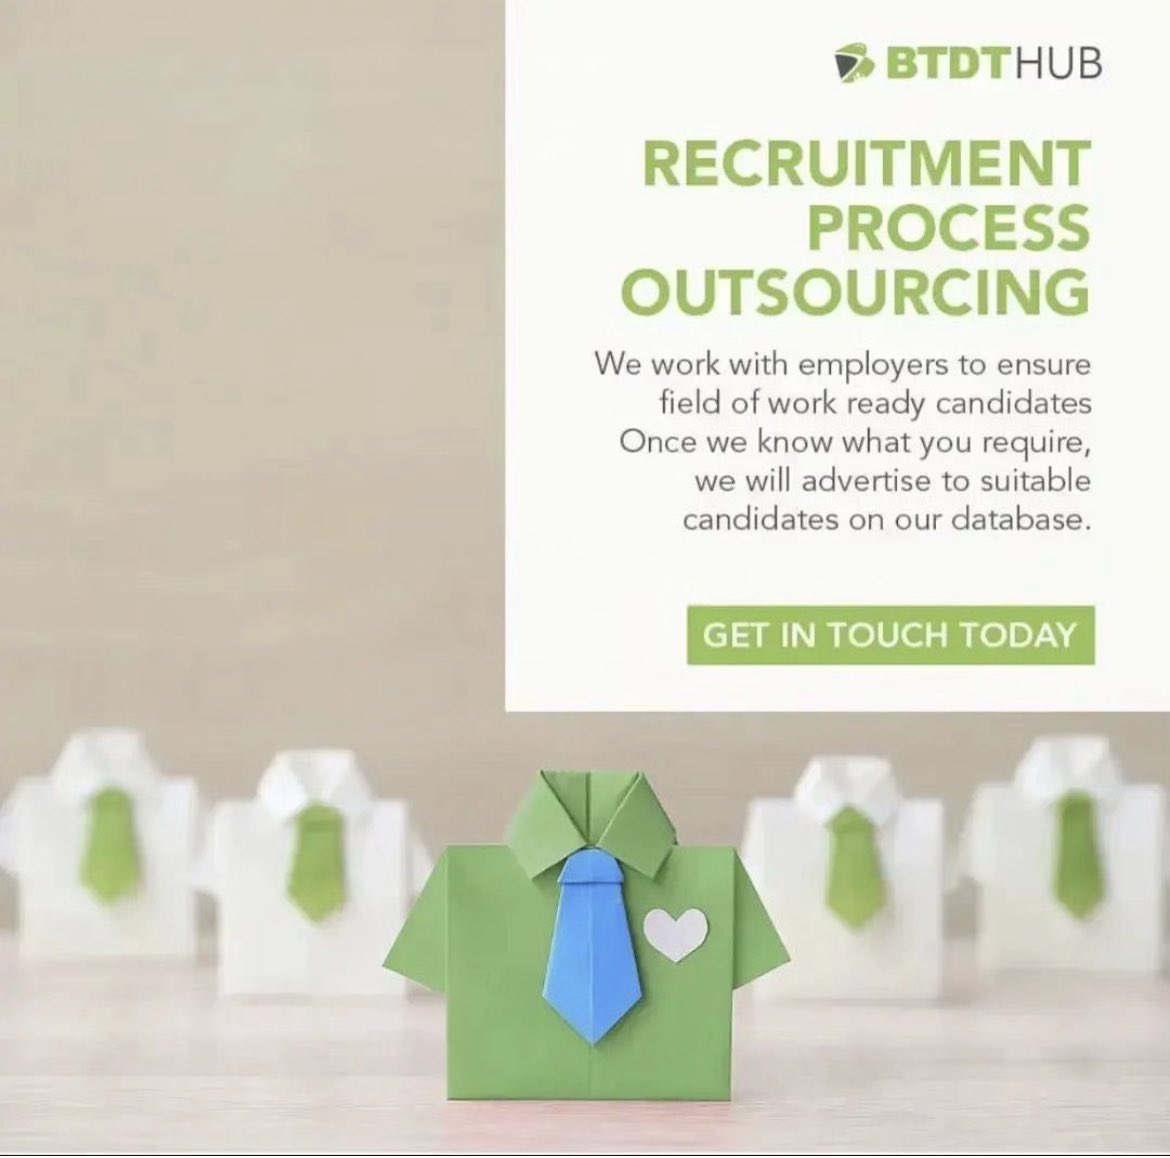 If you have vacancies in your organisation, we can handle your entire RECRUITMENT PROCESS from CV reviews to conducting interviews. Send a DM or an email to INFO@BTDTHUB.COM to get started. #BTDTHub